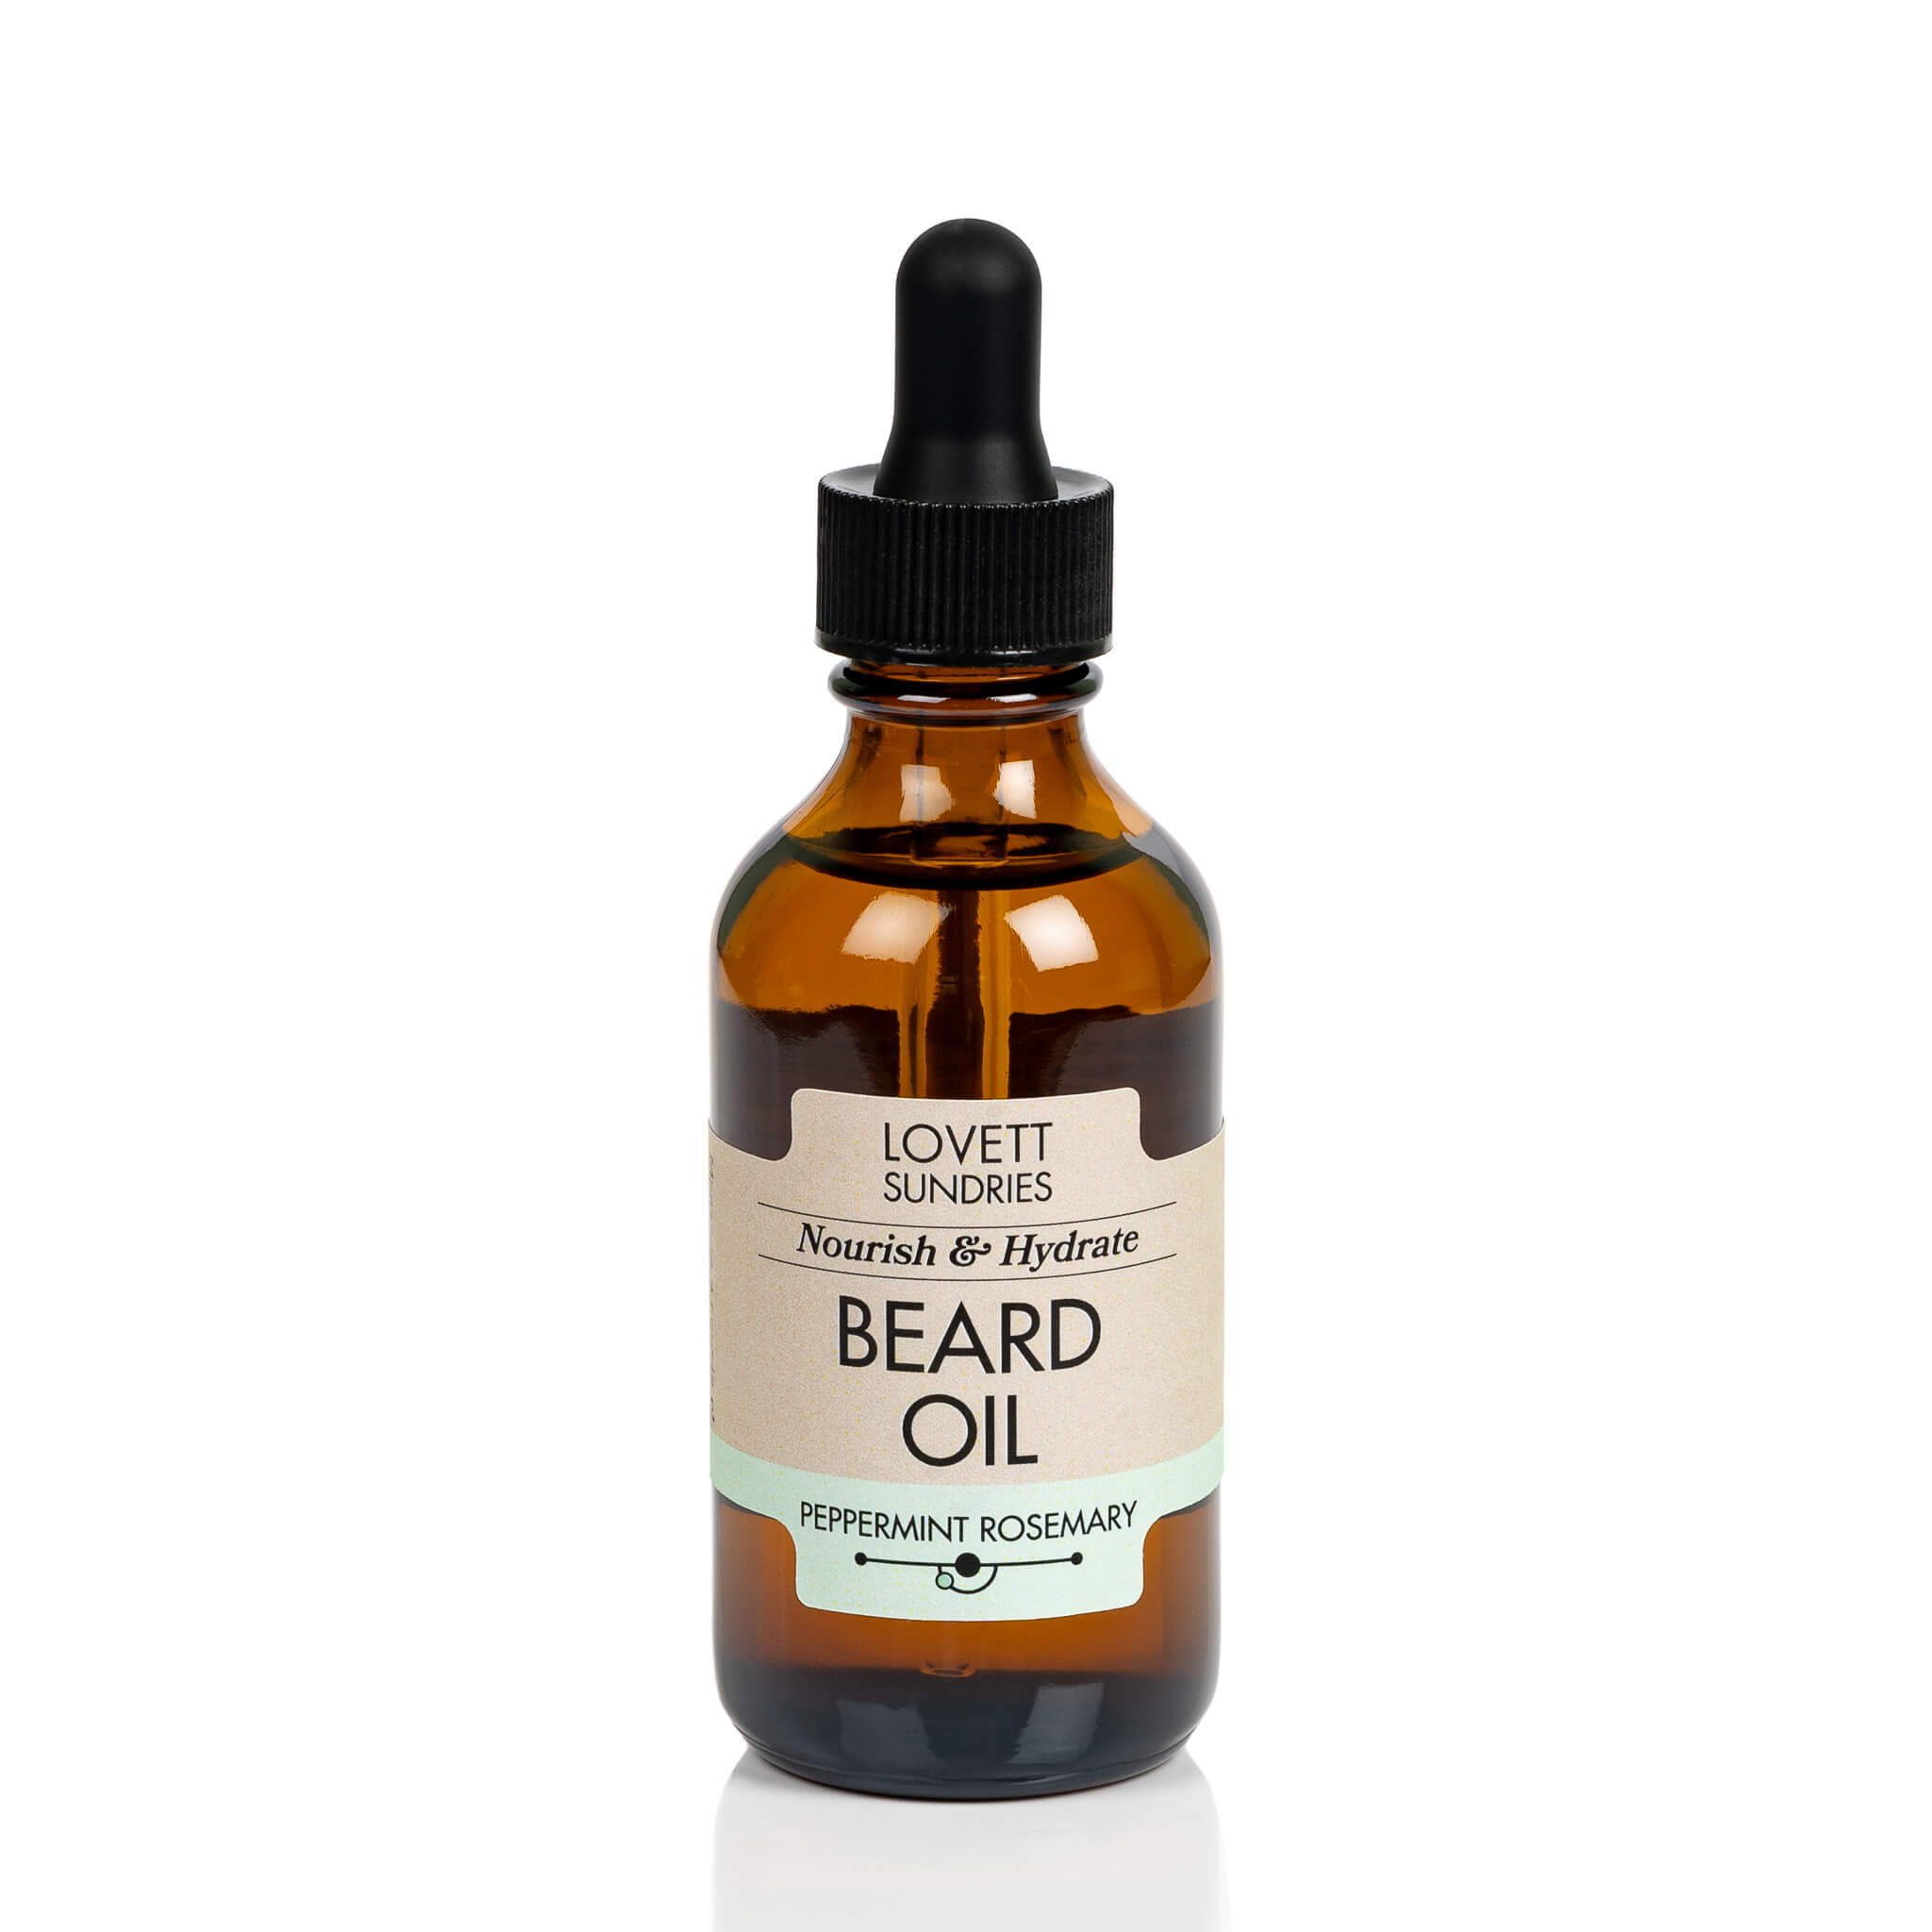 All natural hydrating peppermint rosemary scented beard oil in a brown glass bottle with a dropper. 